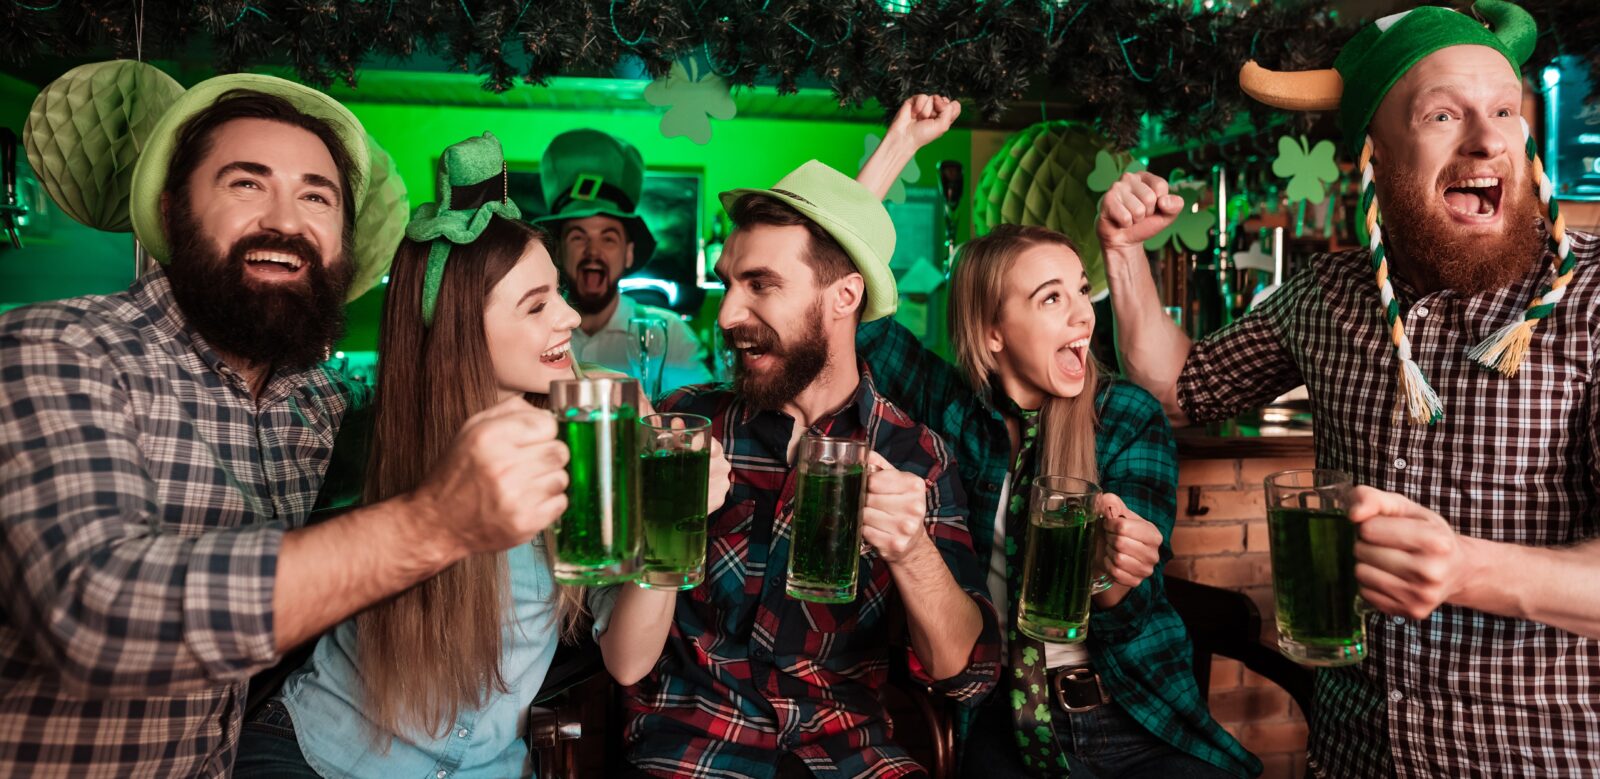 Do The Almost St. Patty’s Day Crawl in Hanford!